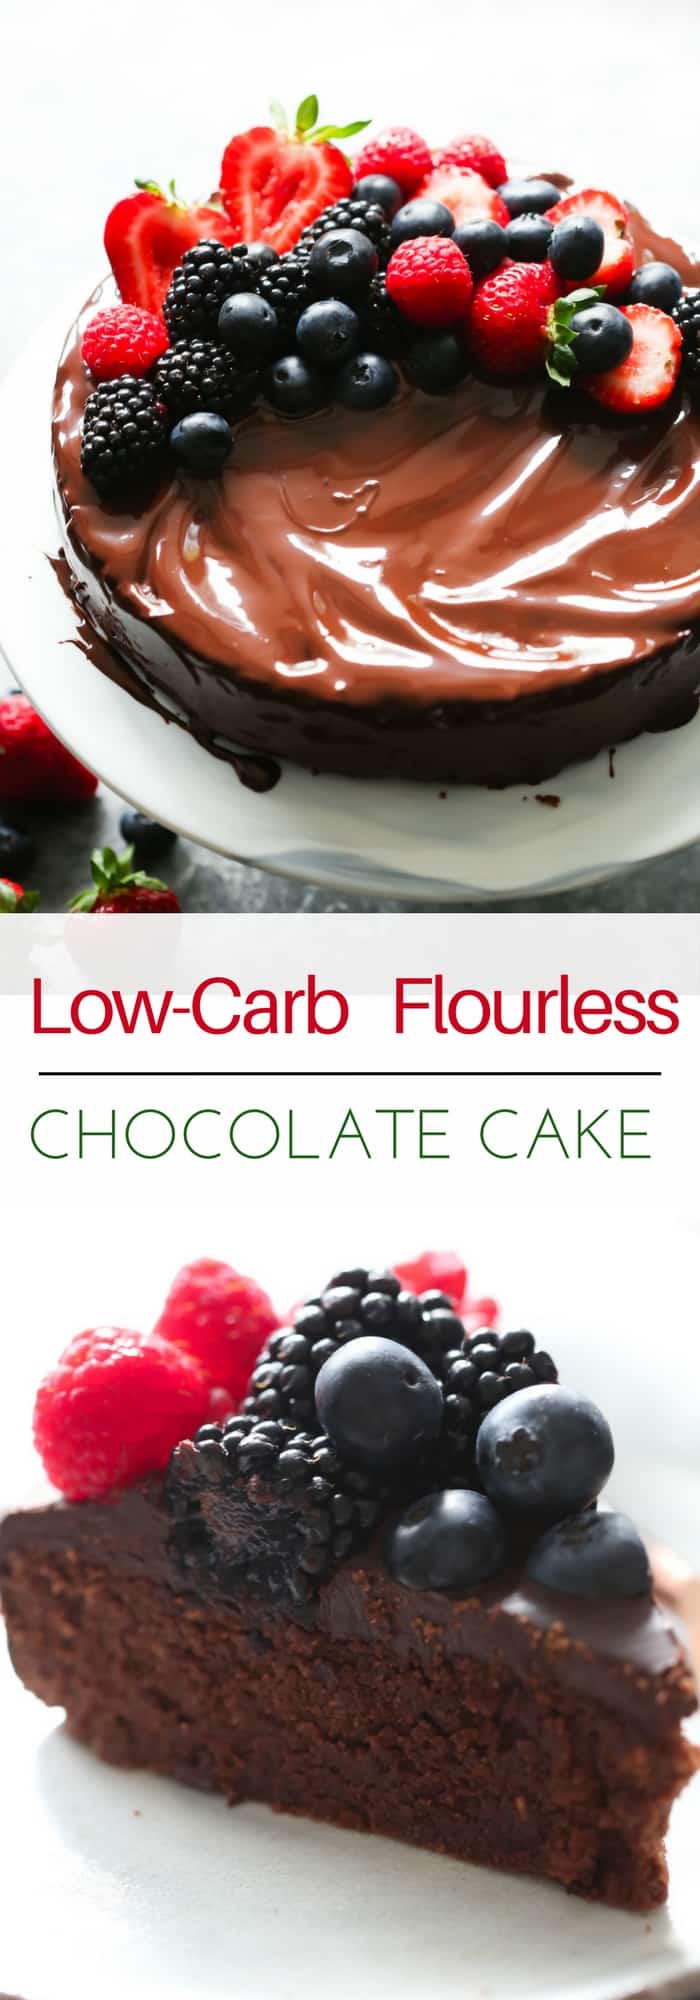 Low-Carb Flourless Chocolate Cake - This Low-Carb Flourless Chocolate Cake is made with Almond flour, which means it's also gluten-free and full of flavour! 